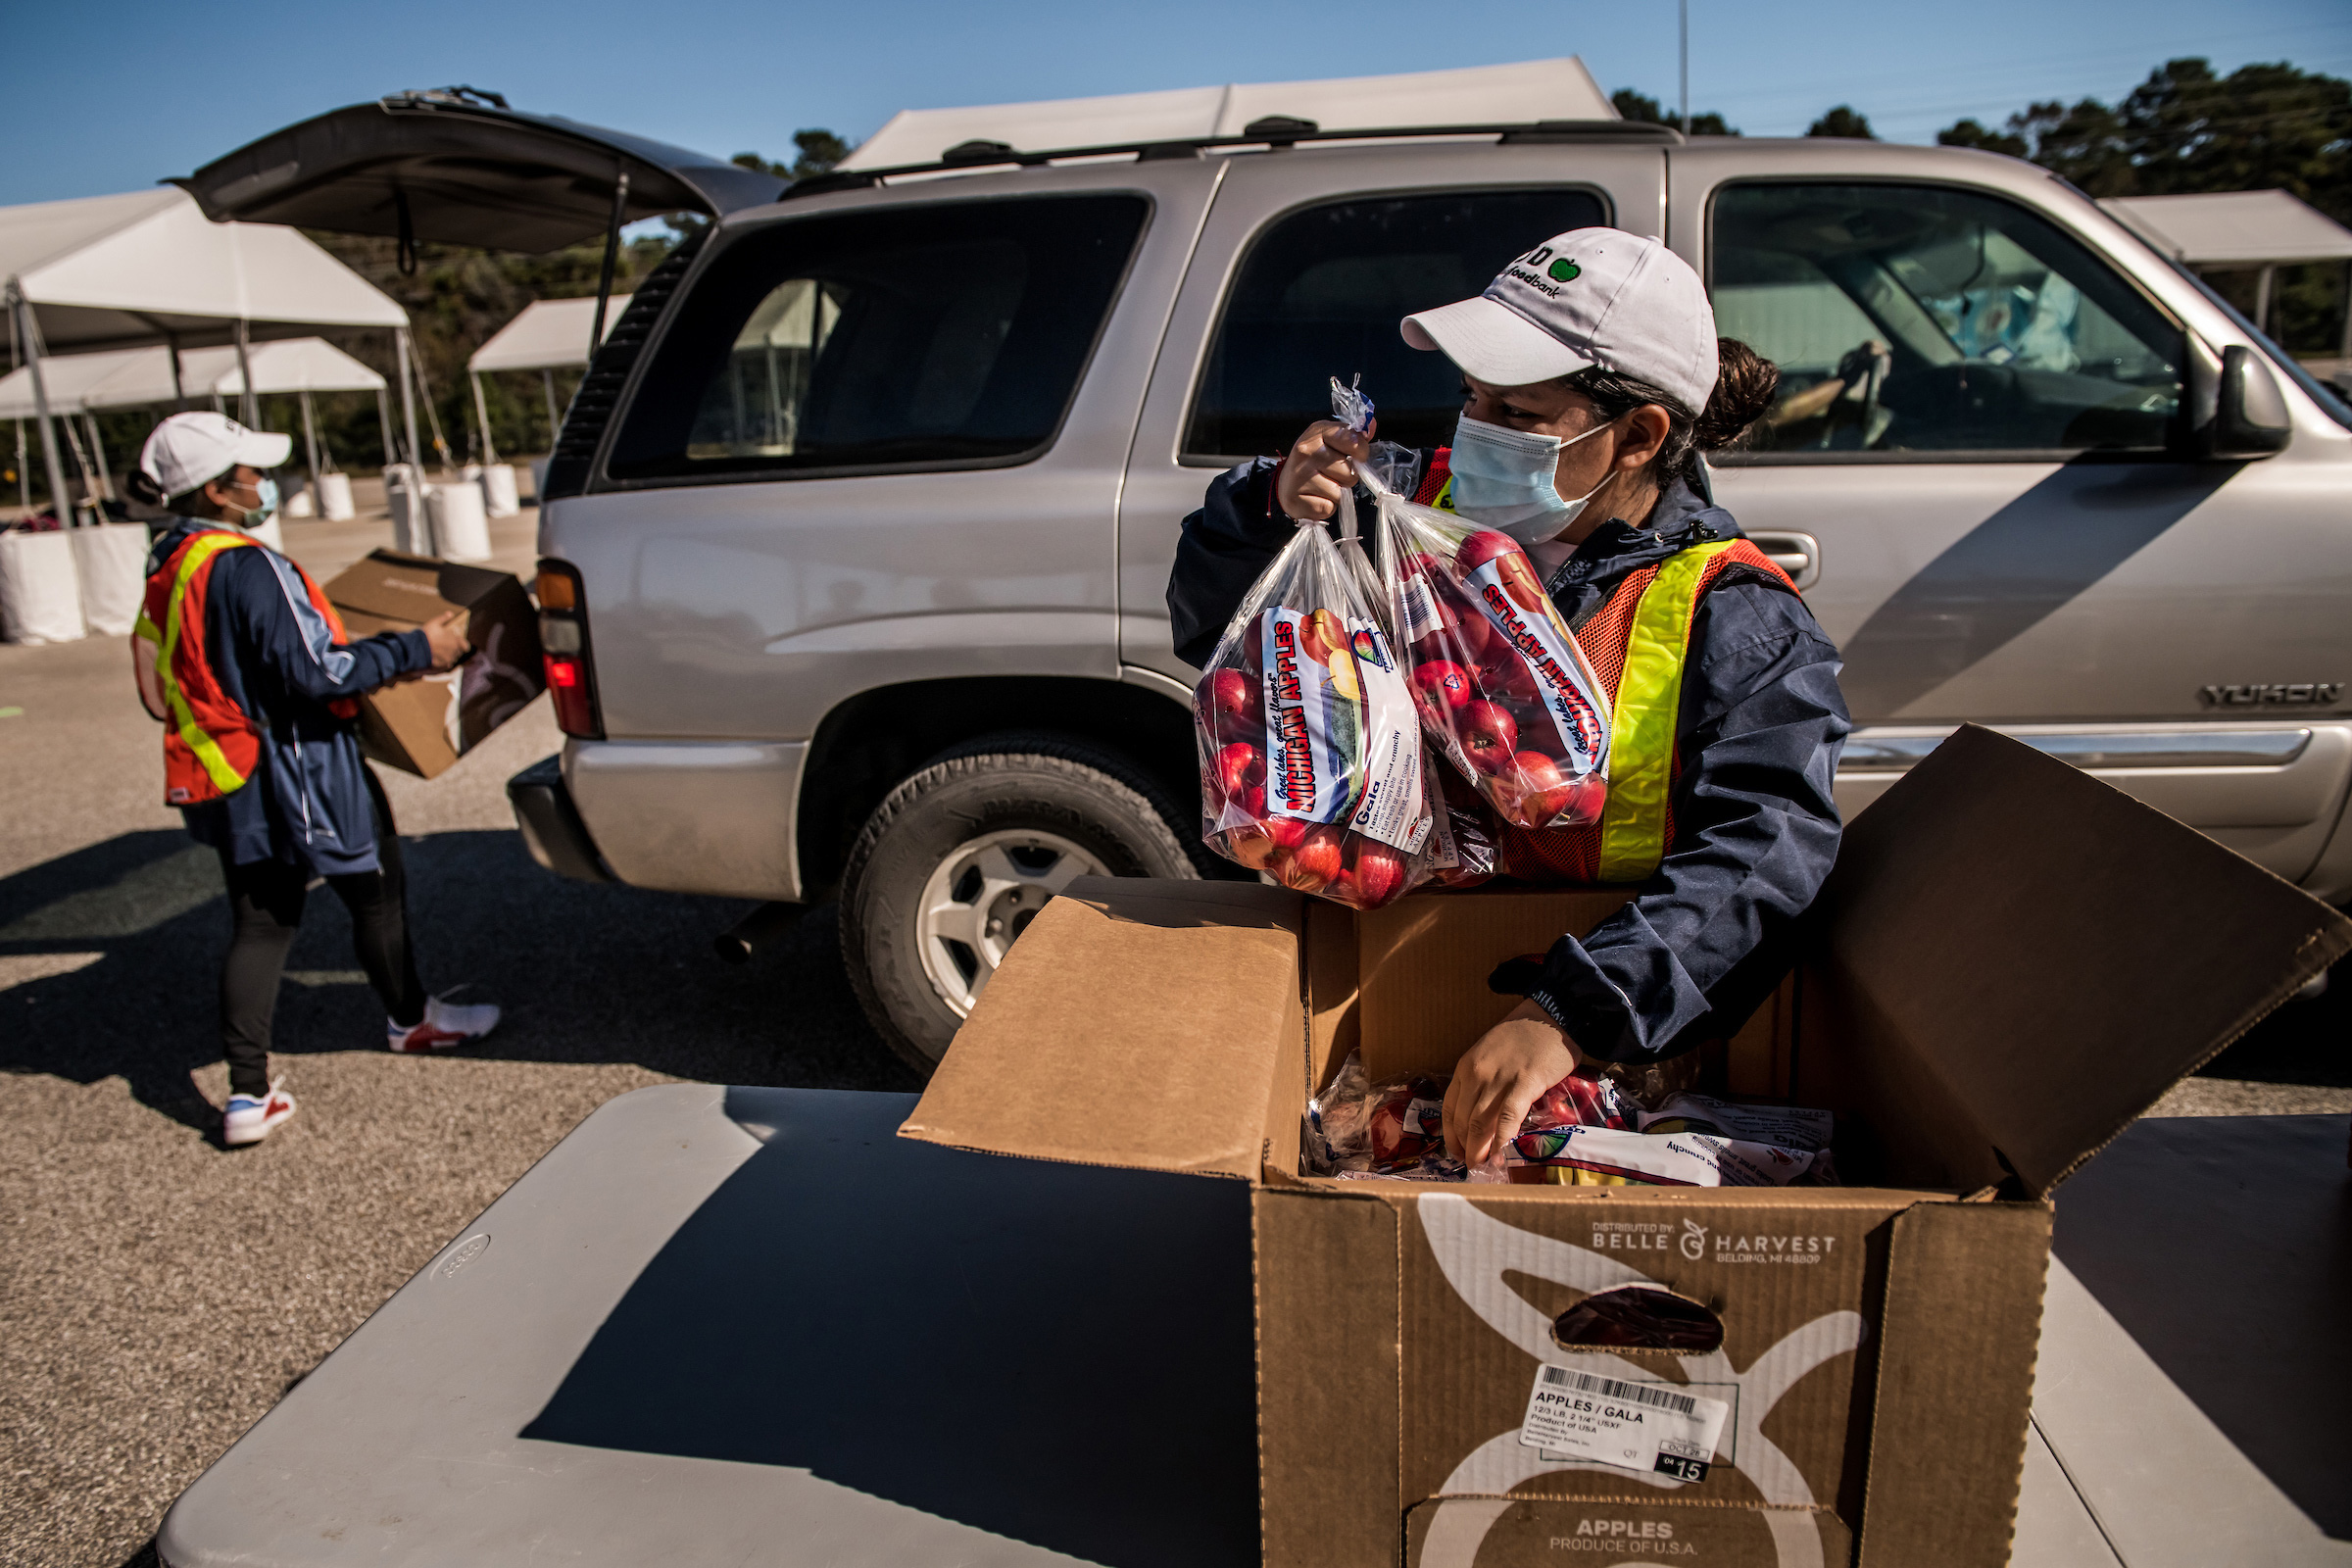 Boxes of food are loaded into cars at the food distribution site run by the Houston Food Bank. (Meridith Kohut for TIME)